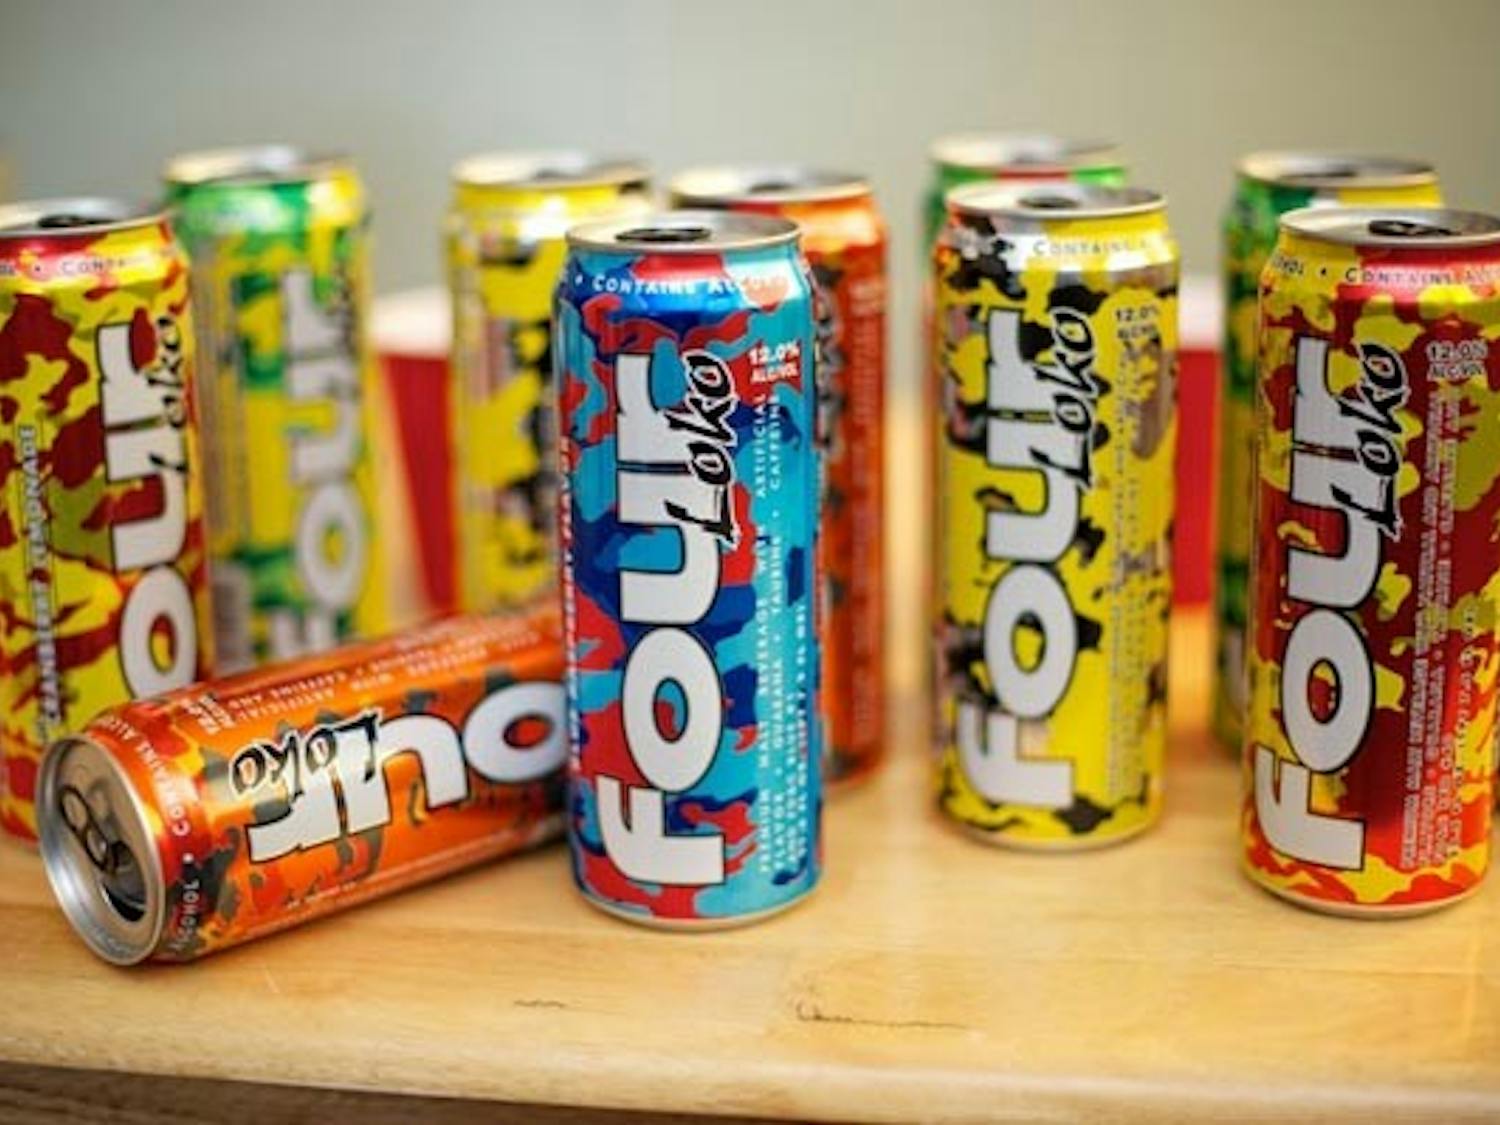 ADIÓS LOKO: Phusion Projects, LLC, the company that produces Four Loko, was recently forced to end distribution of the popular caffeinated malt beverage after FDA insistence. (Photo by Michael Arellano)